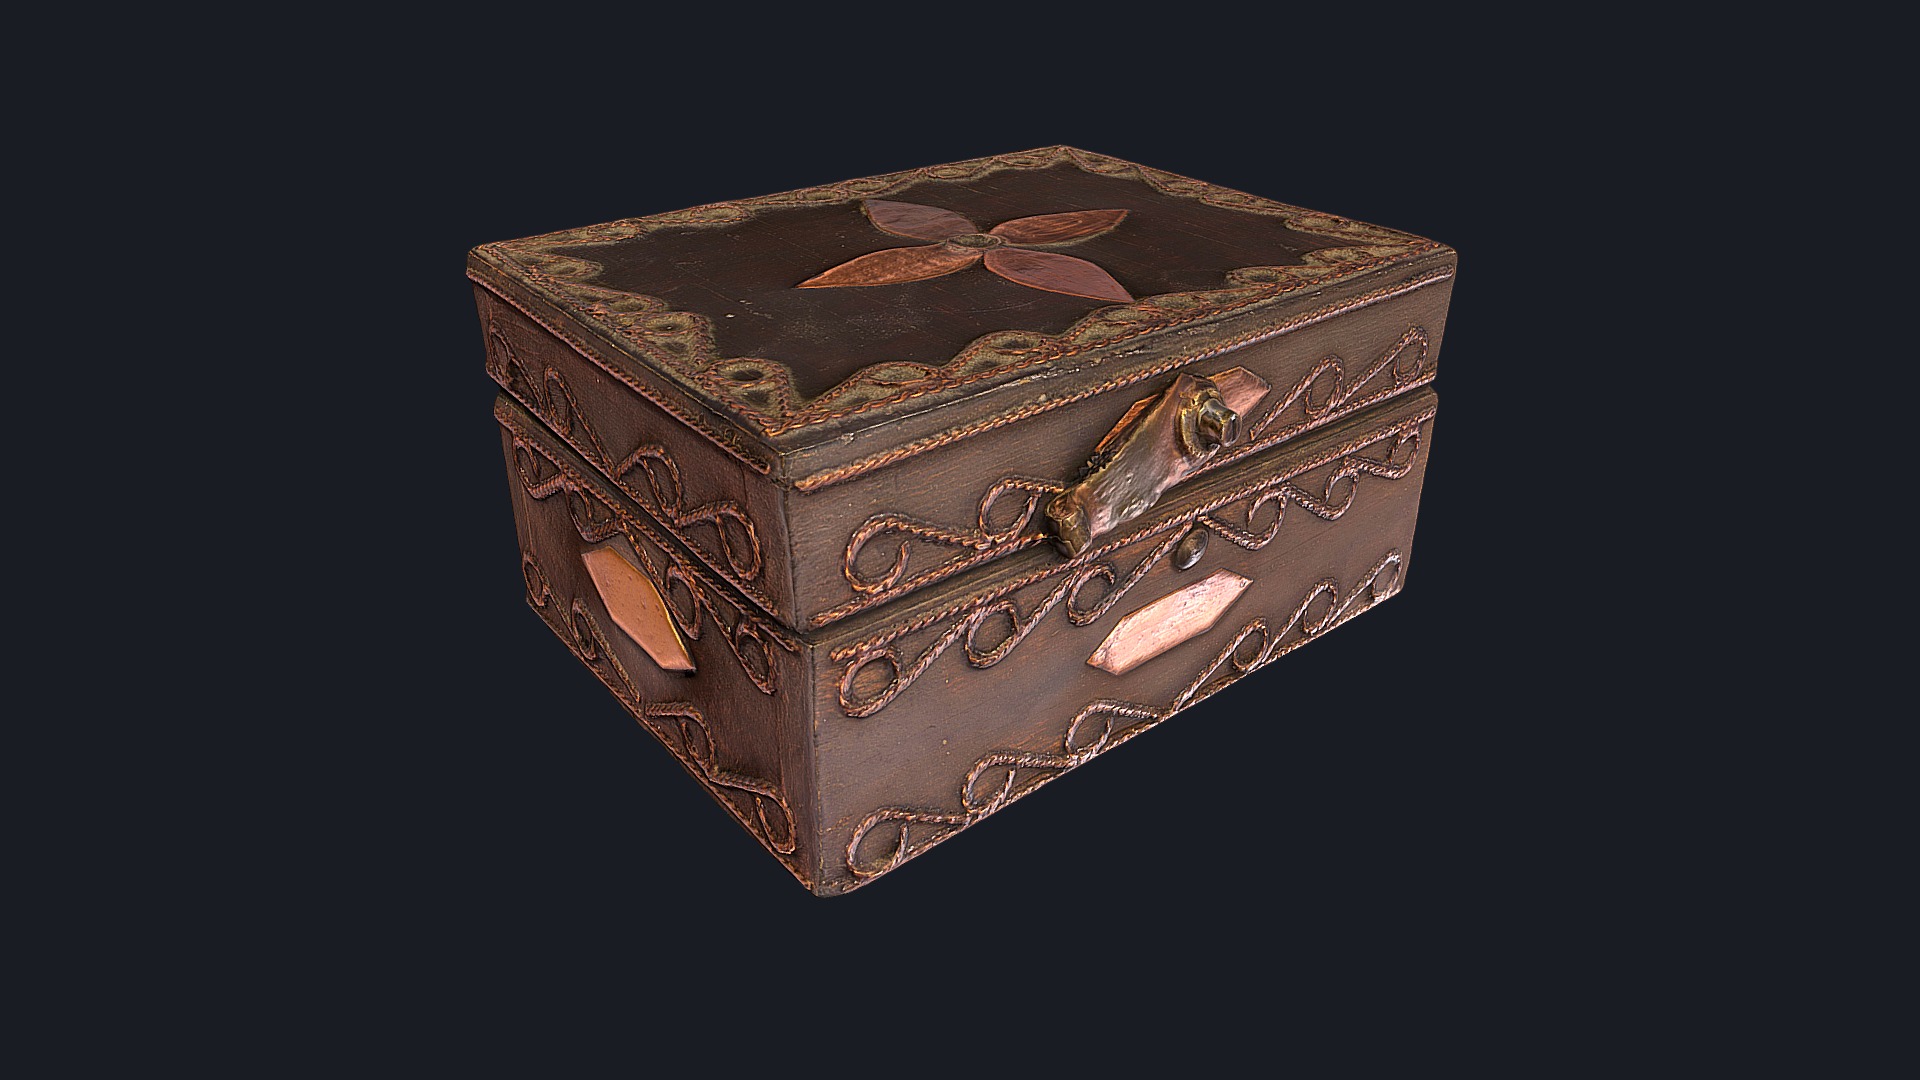 3D model Vintage Handmade Jewelry Box – Photogrammetry - This is a 3D model of the Vintage Handmade Jewelry Box - Photogrammetry. The 3D model is about a wooden box with a design on it.